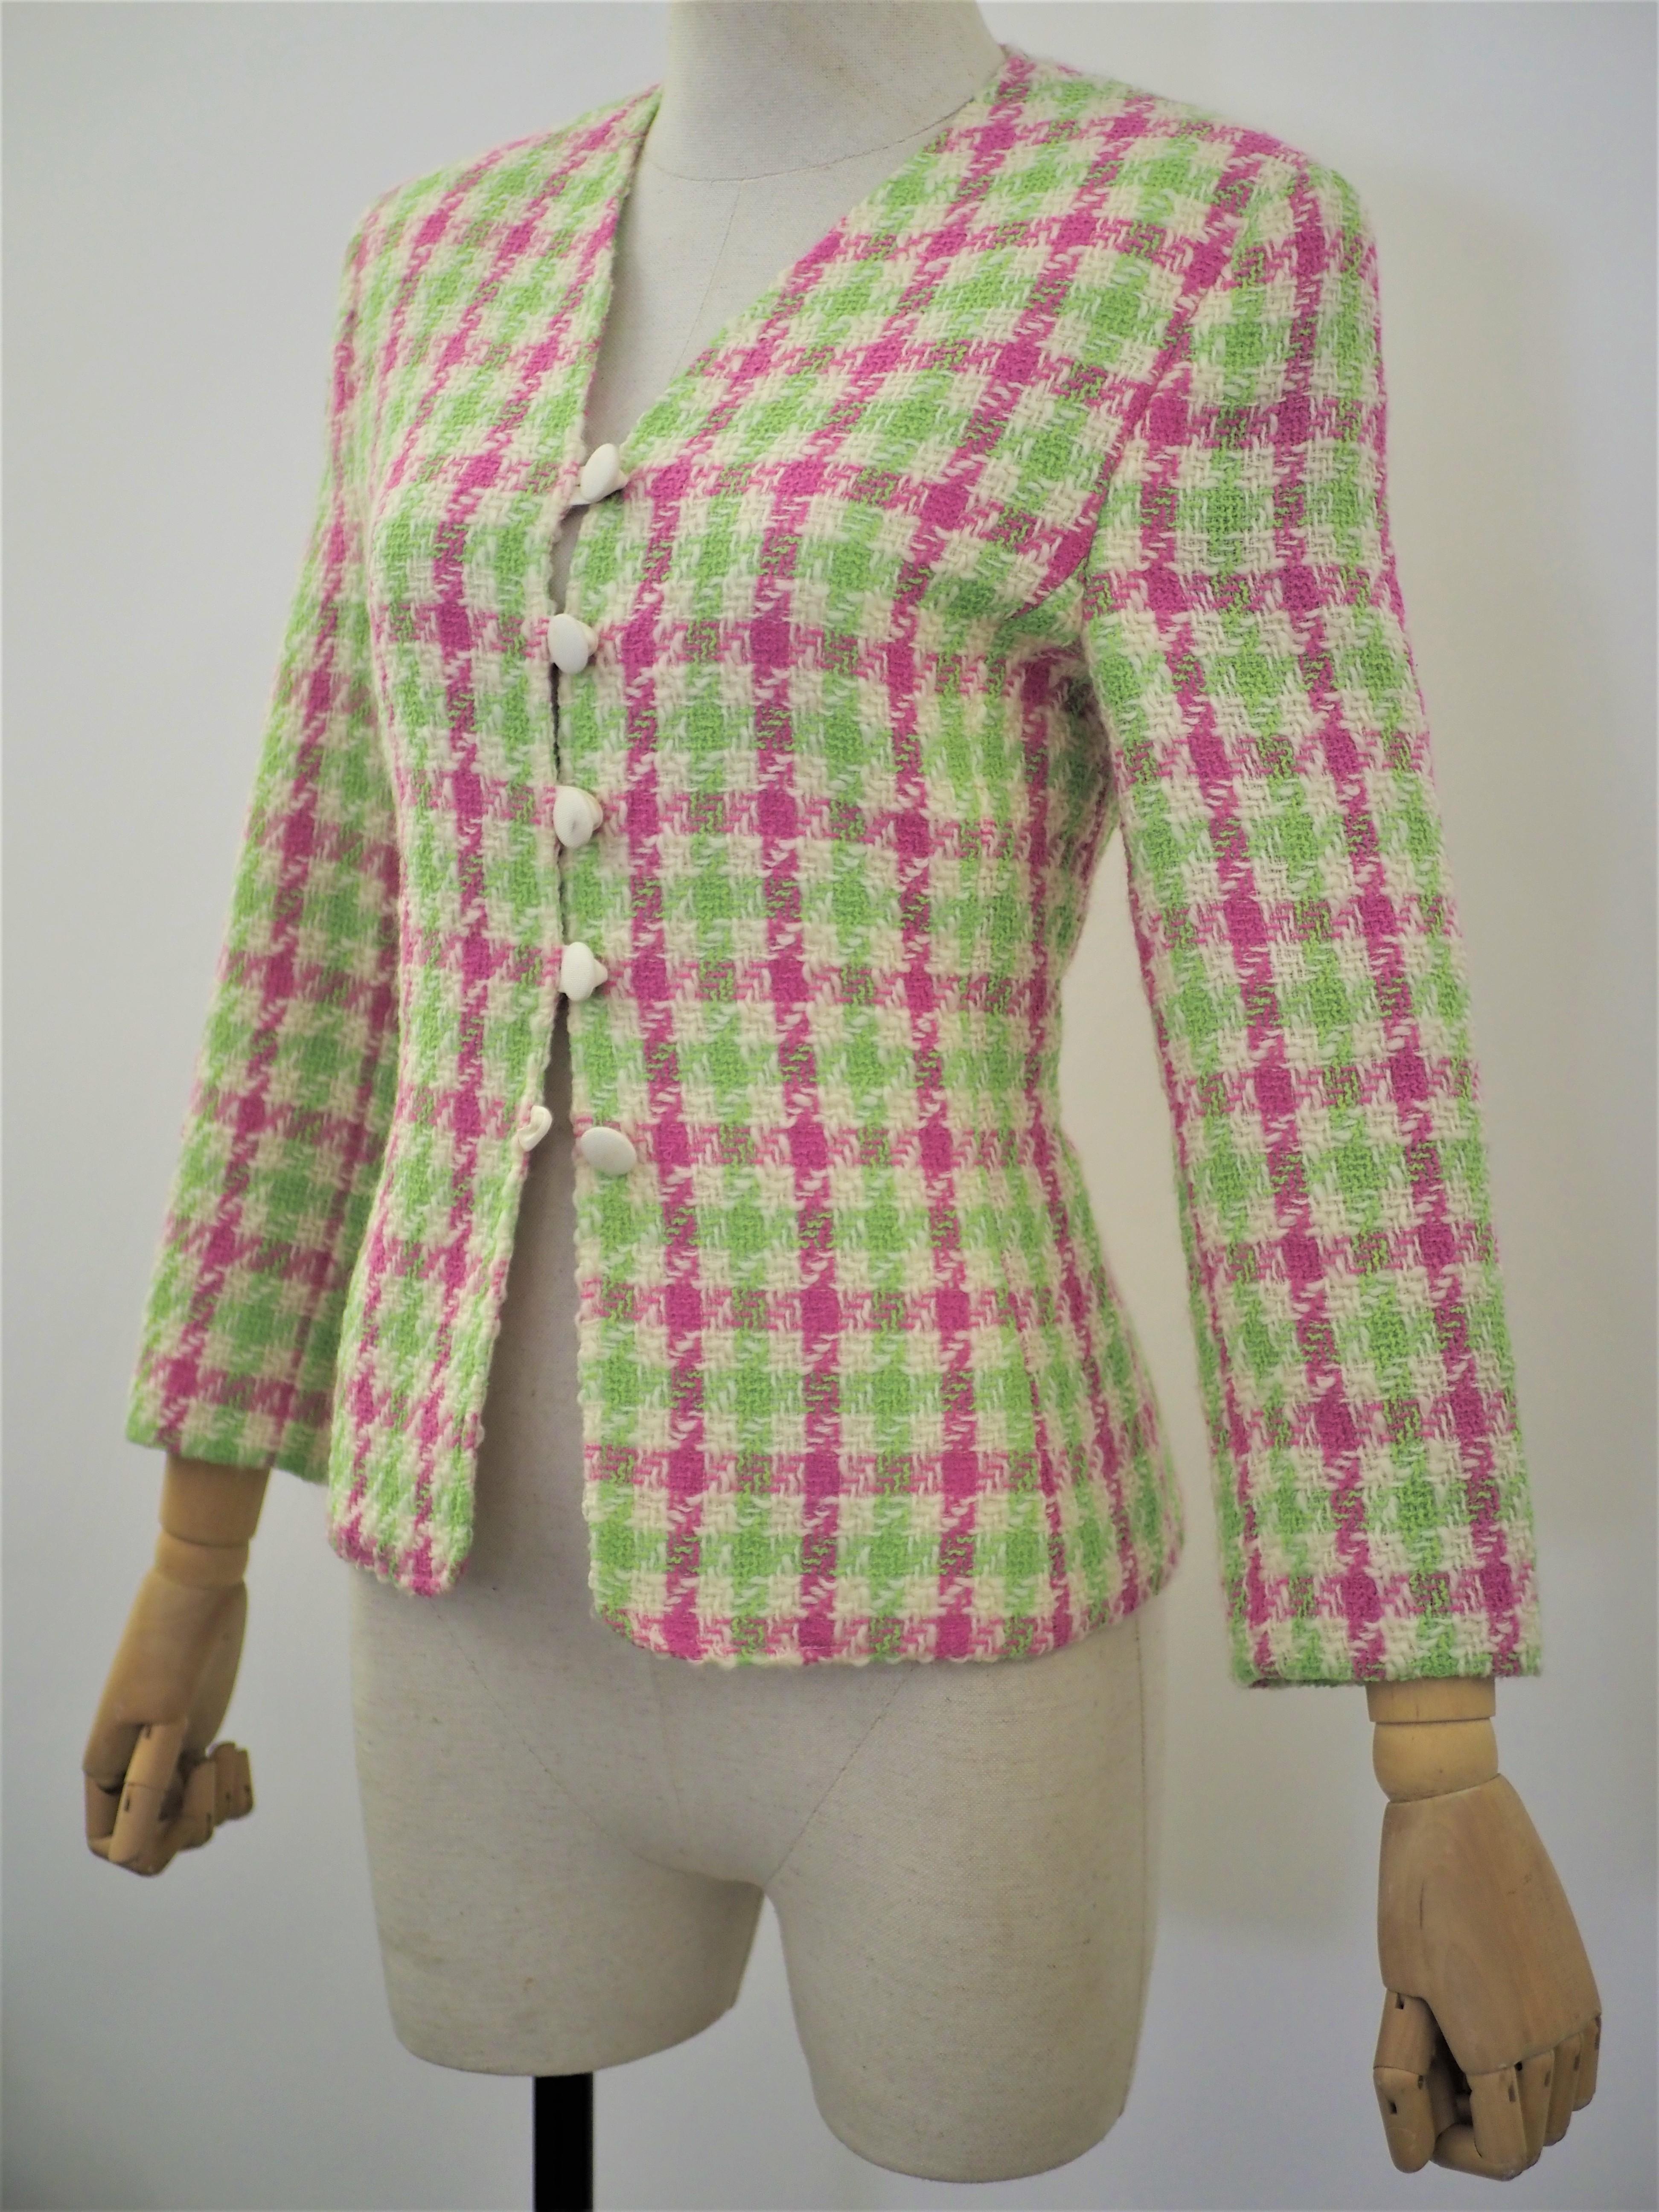 Genny multicoloured wool jacket
totally made in italy in size M 